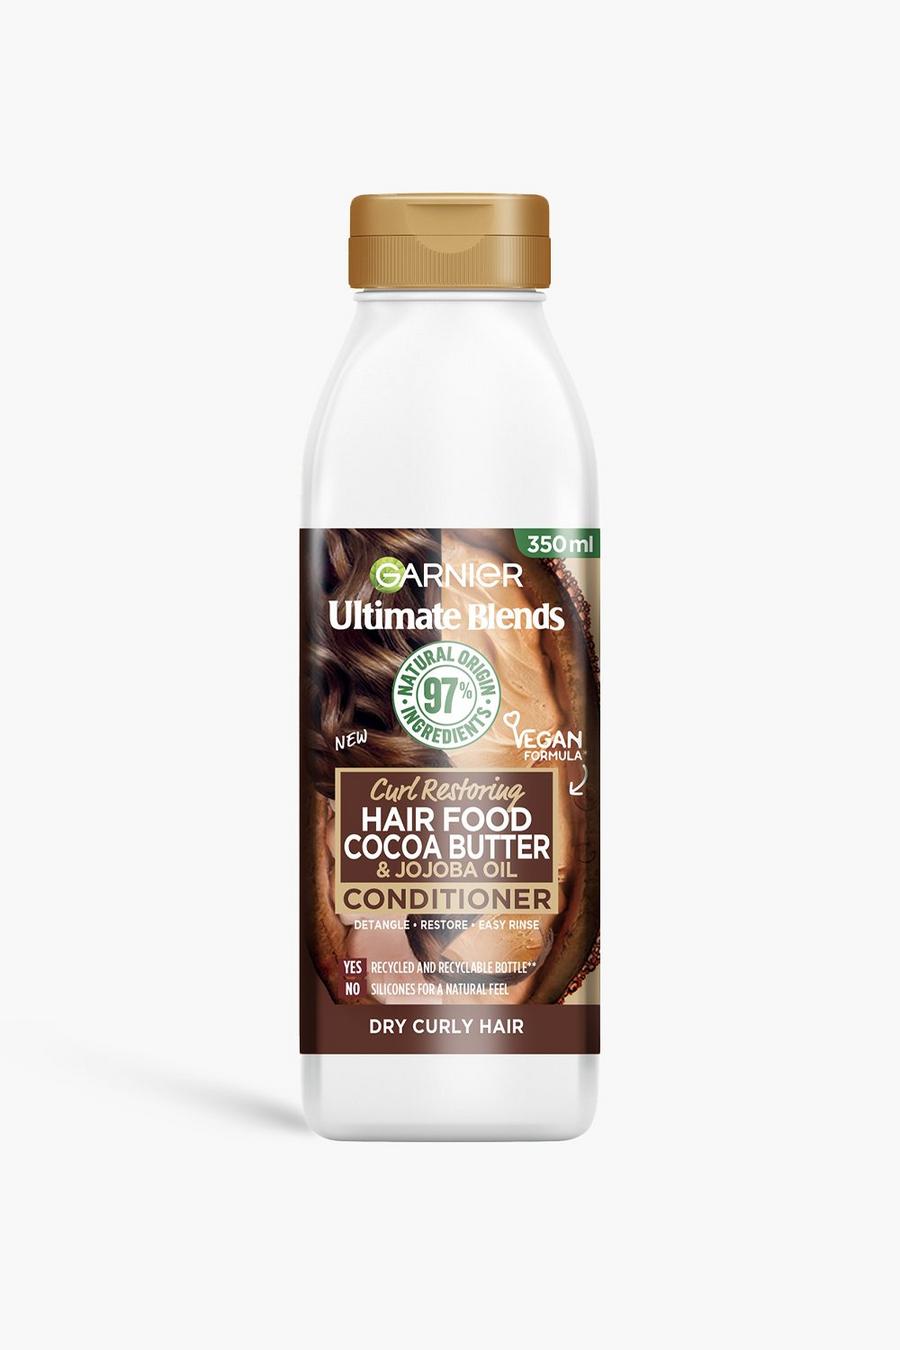 White Garnier Ultimate Blends Cocoa Butter Conditioner for Dry, Curly Hair